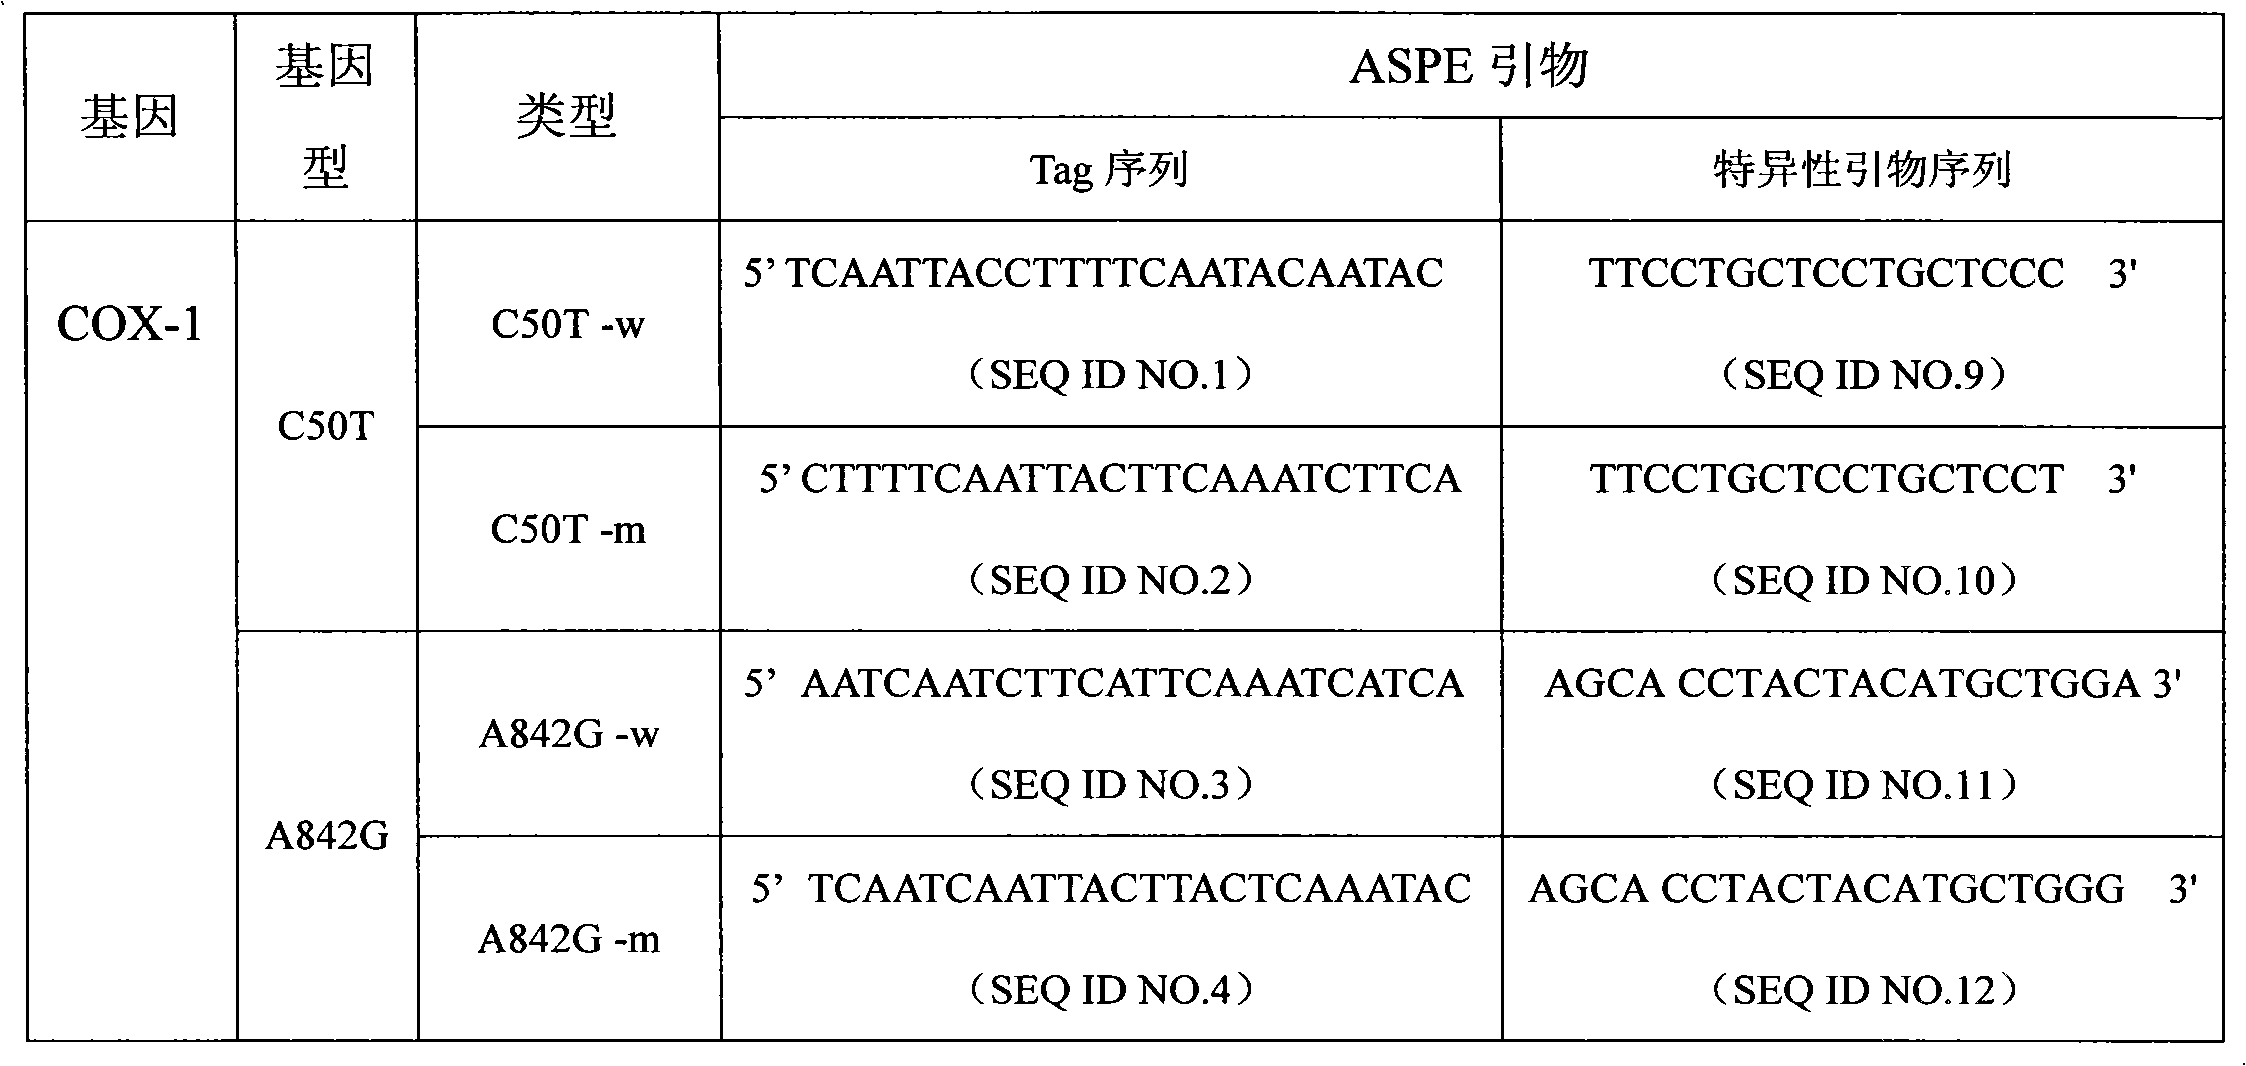 Liquid chip and specific primer for detecting SNP of GPIIIa gene and liquid chip and specific primer for detecting SNP of GPIIIa and COX-1 genes